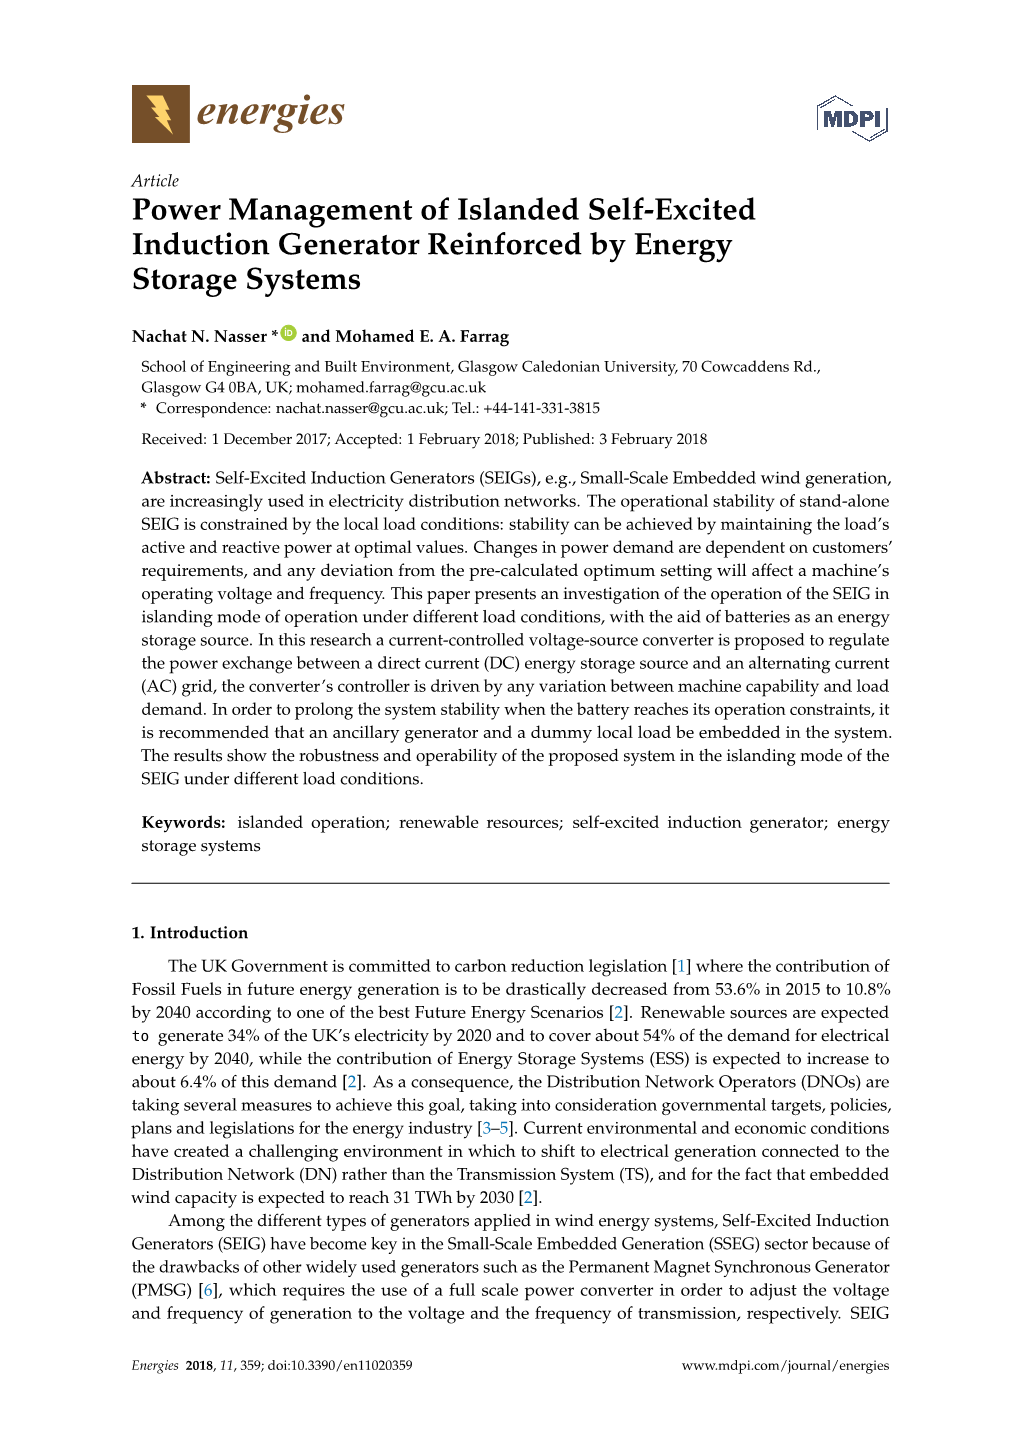 Power Management of Islanded Self-Excited Induction Generator Reinforced by Energy Storage Systems